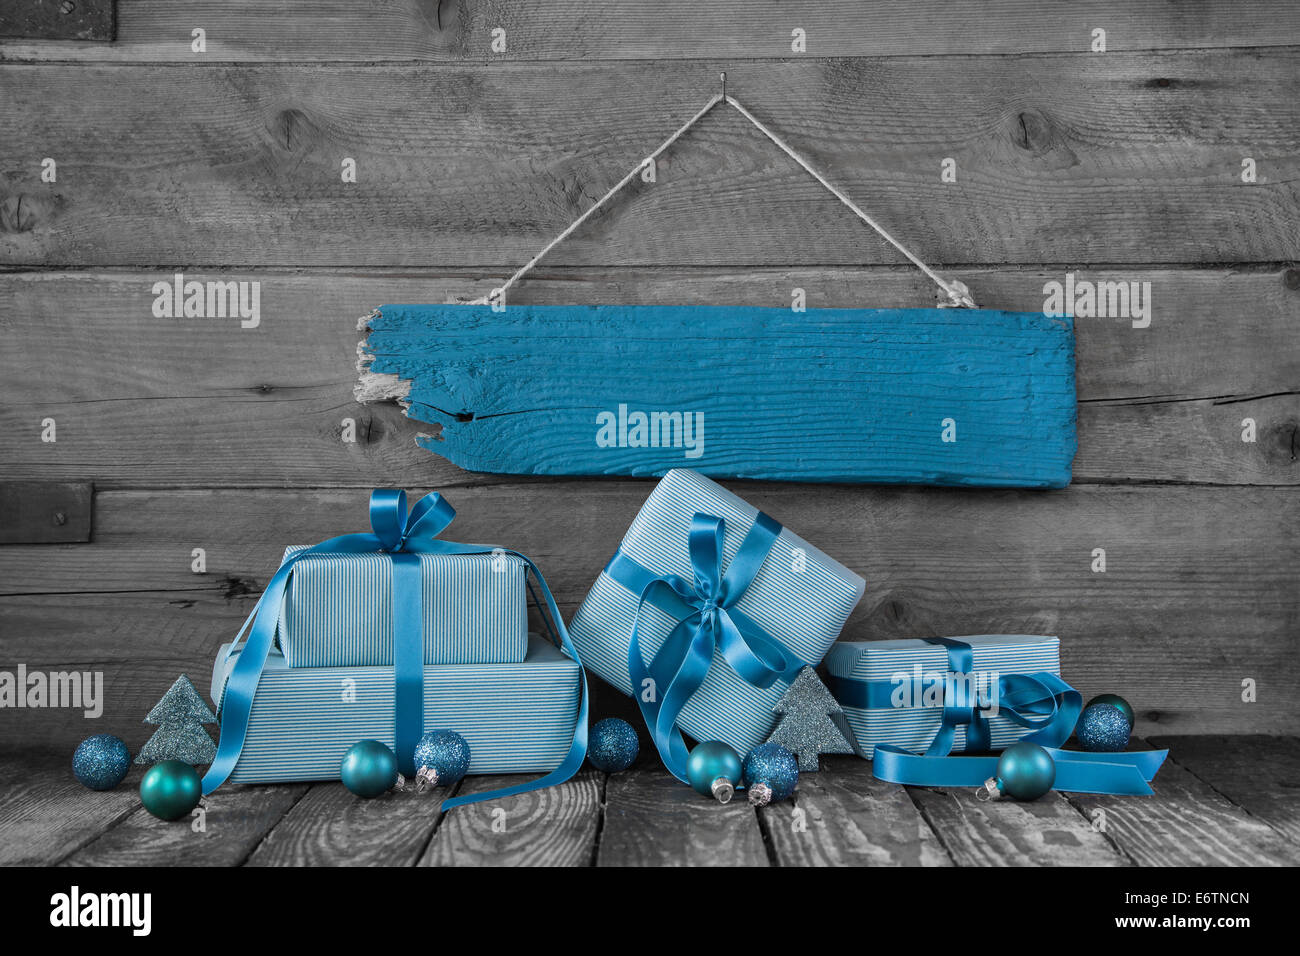 Background: Christmas voucher or coupon with gifts in turquoise blue. Stock Photo